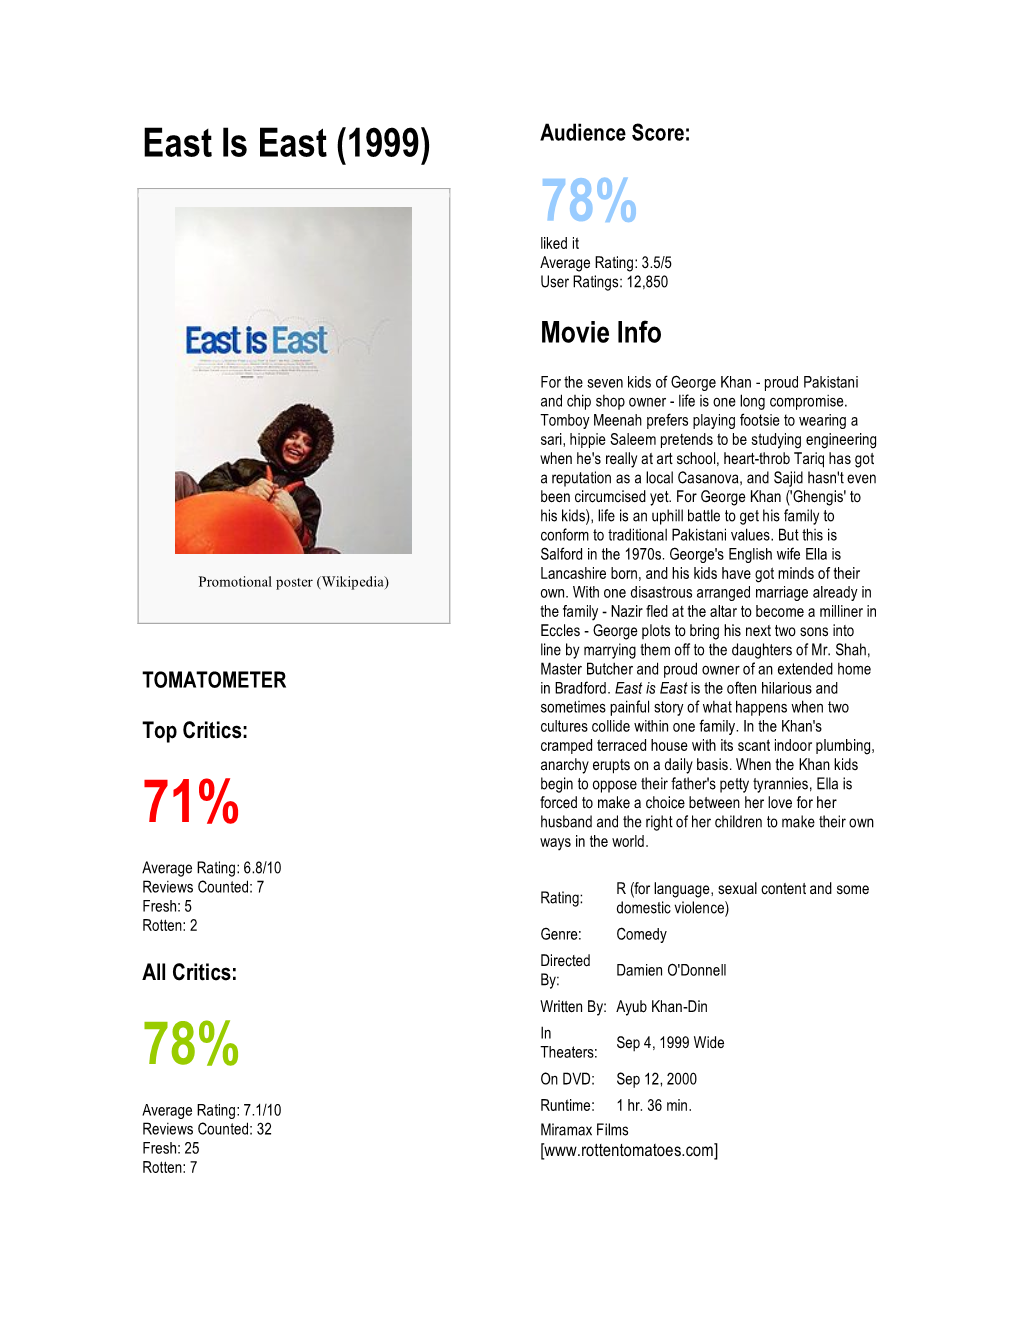 East Is East (1999) 78% Liked It Average Rating: 3.5/5 User Ratings: 12,850 Movie Info